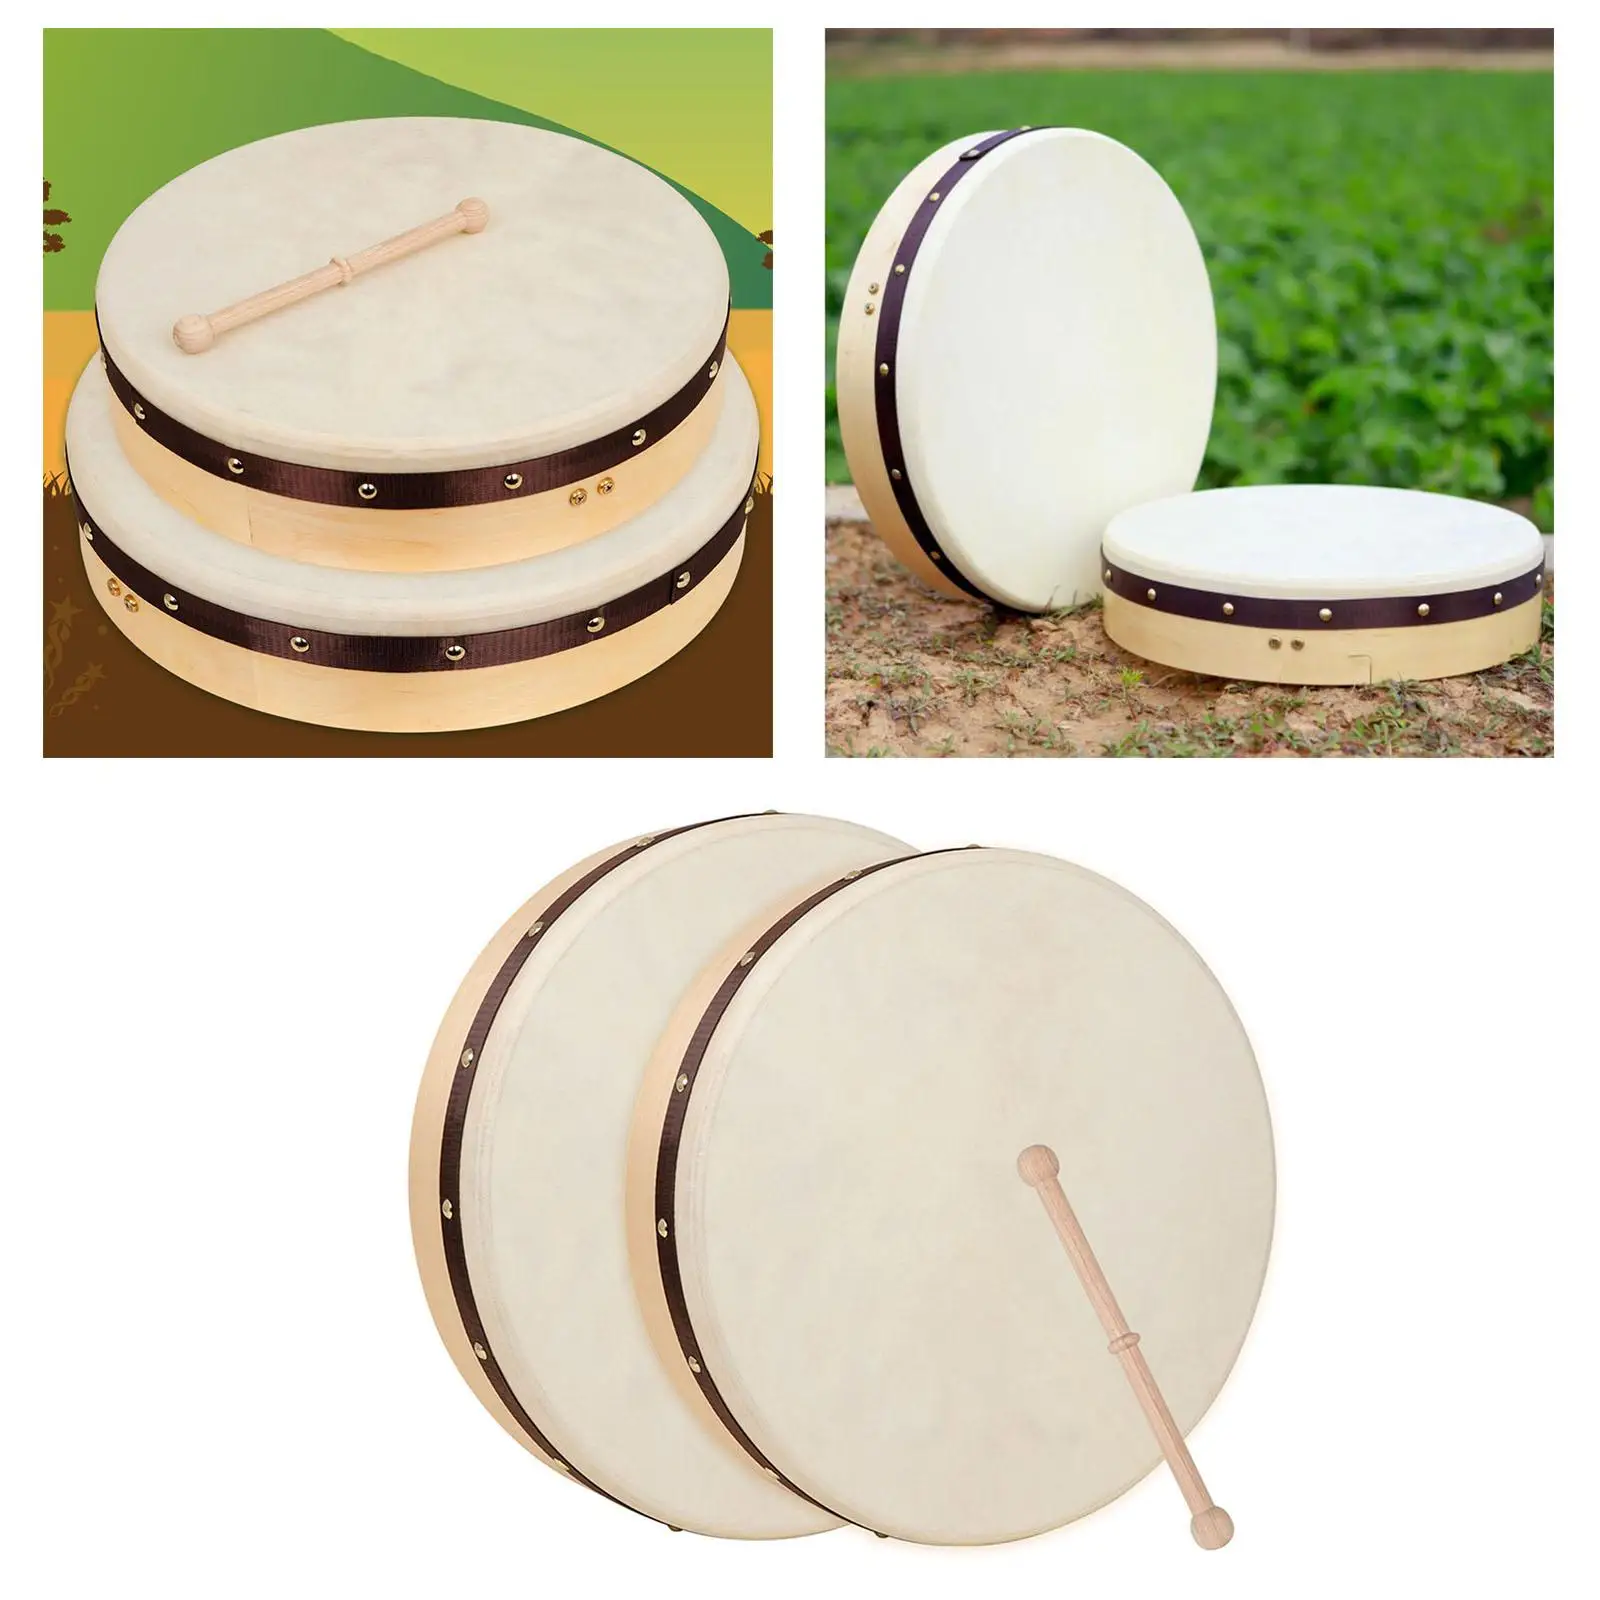 Wood Frame Drum with Beater Musical Educational for Children Music Game